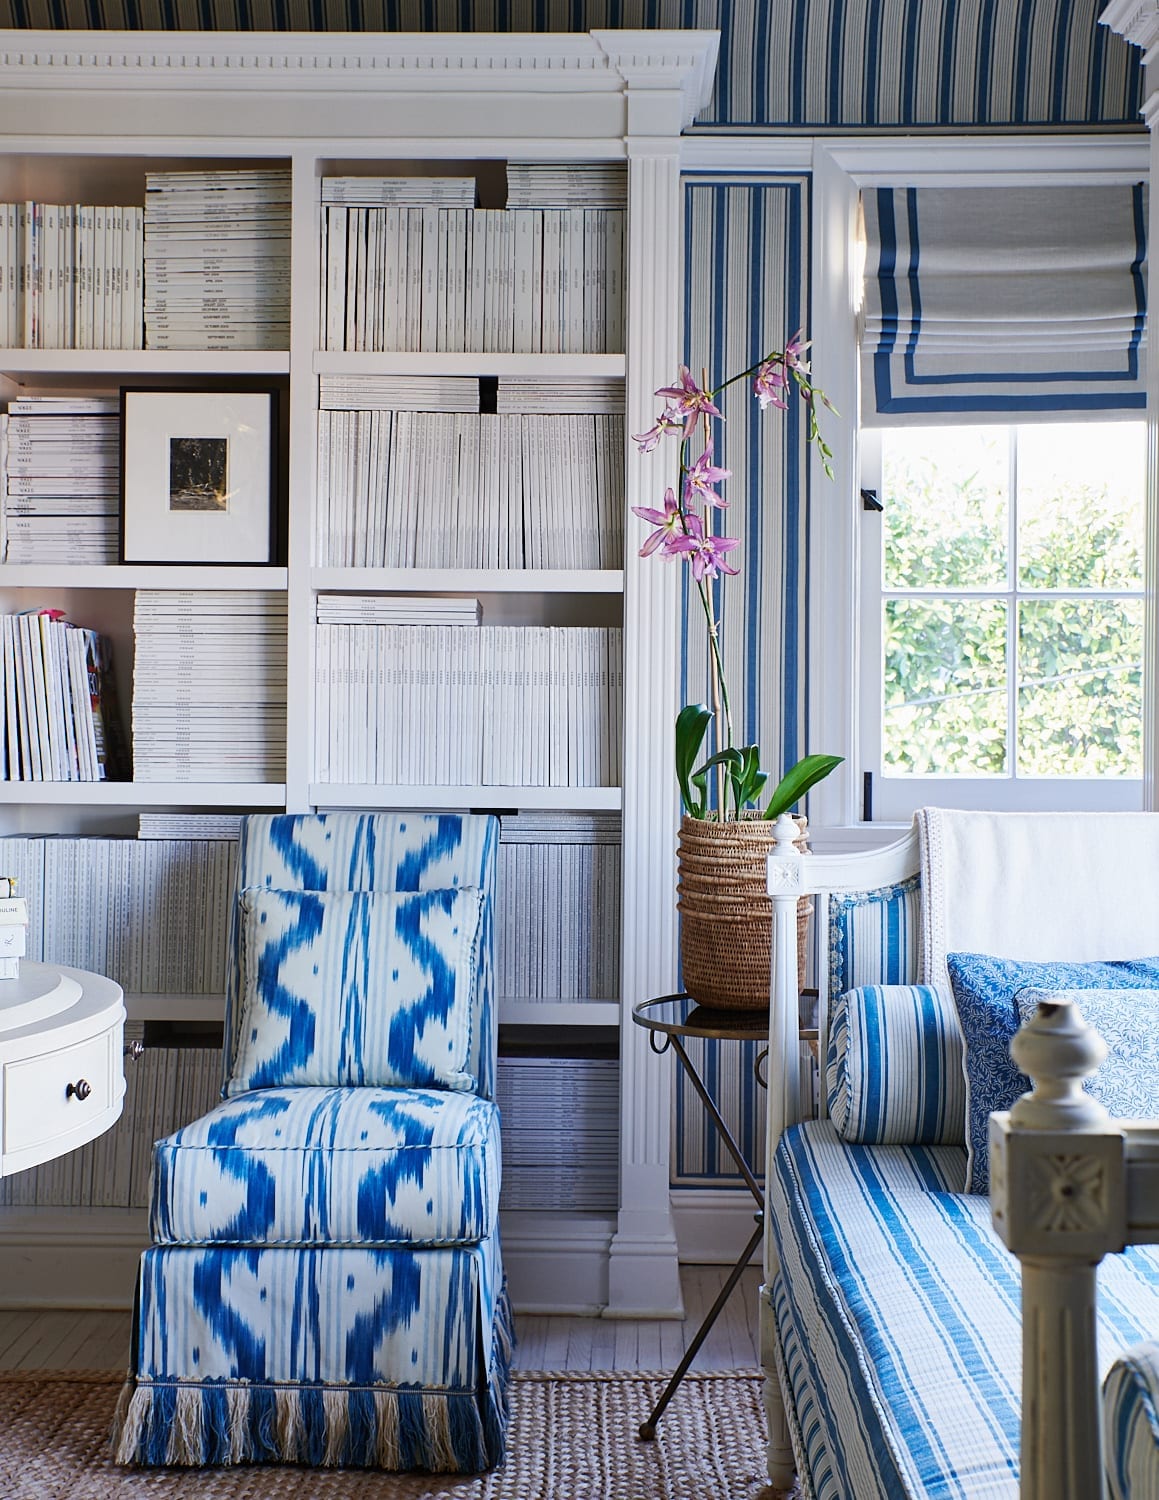 Mark D. Sikes designed bookcases | Helen Norman Photography